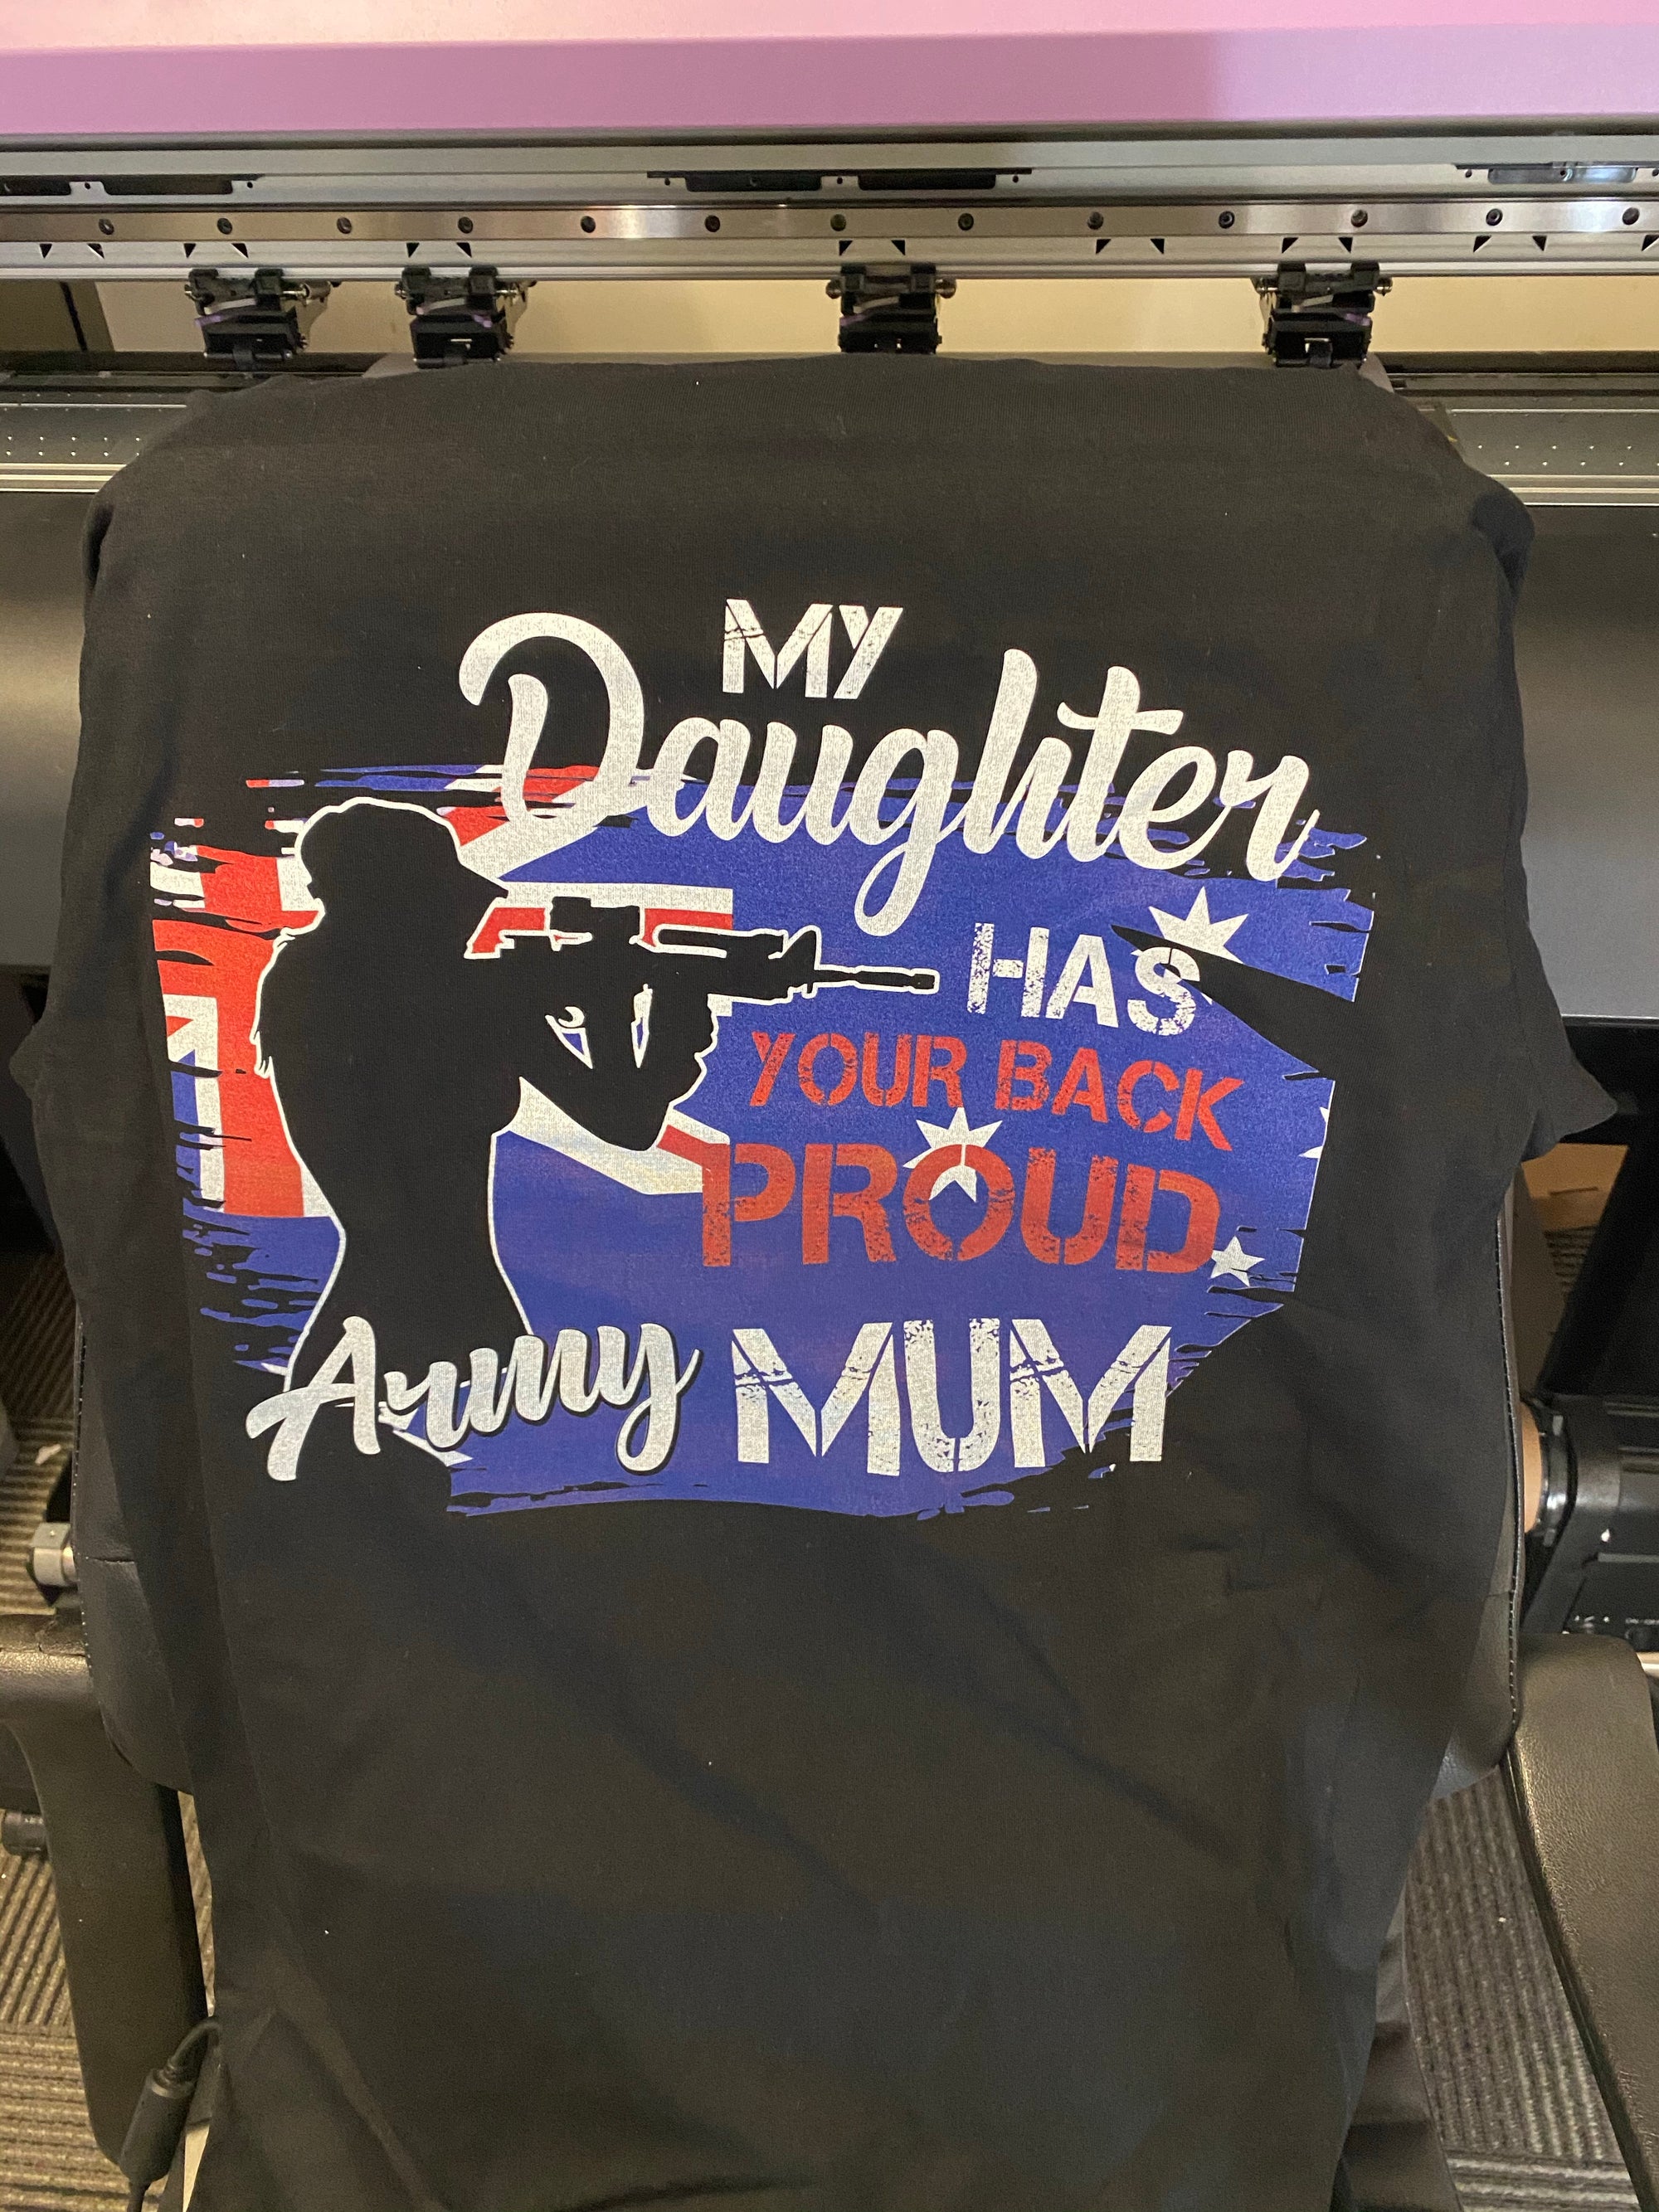 Army mum daughter has your back